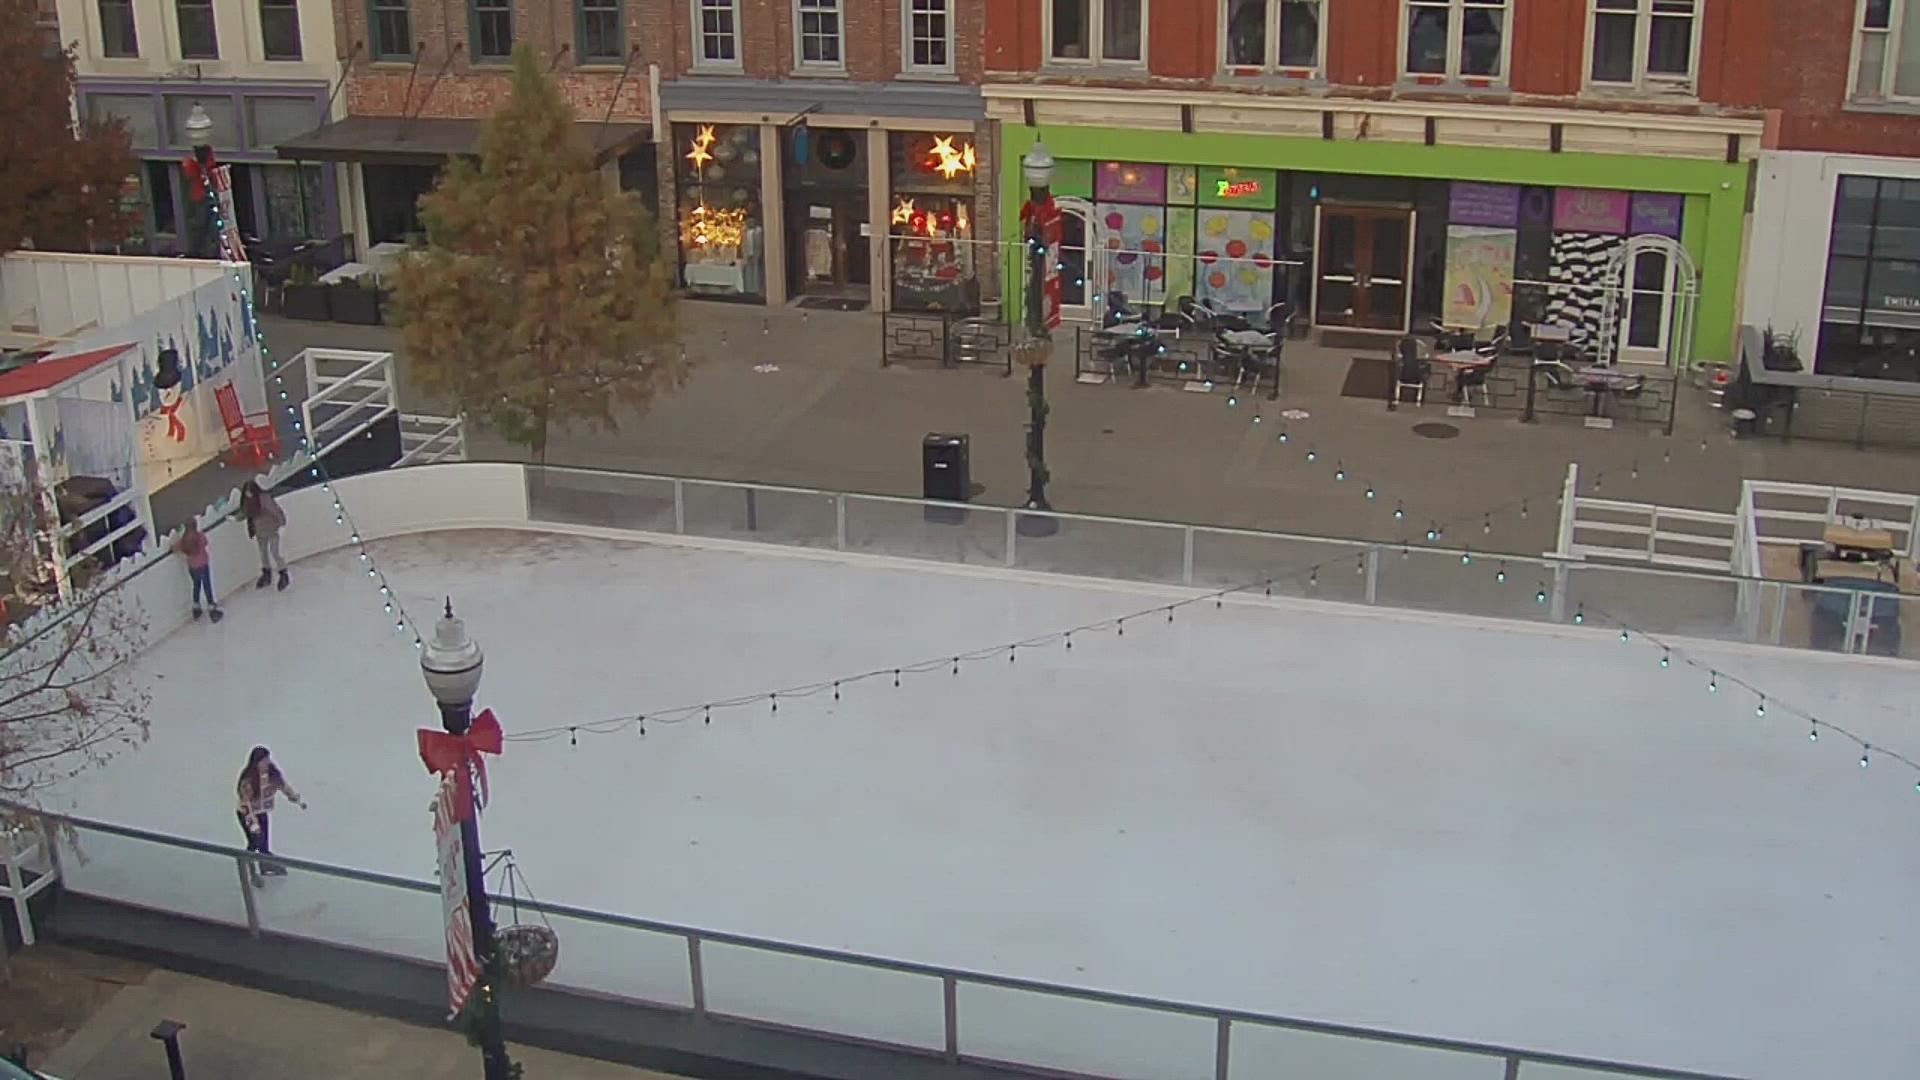 You'll be able to ice skate in Downtown Knoxville soon. Holidays on Ice opens Friday.